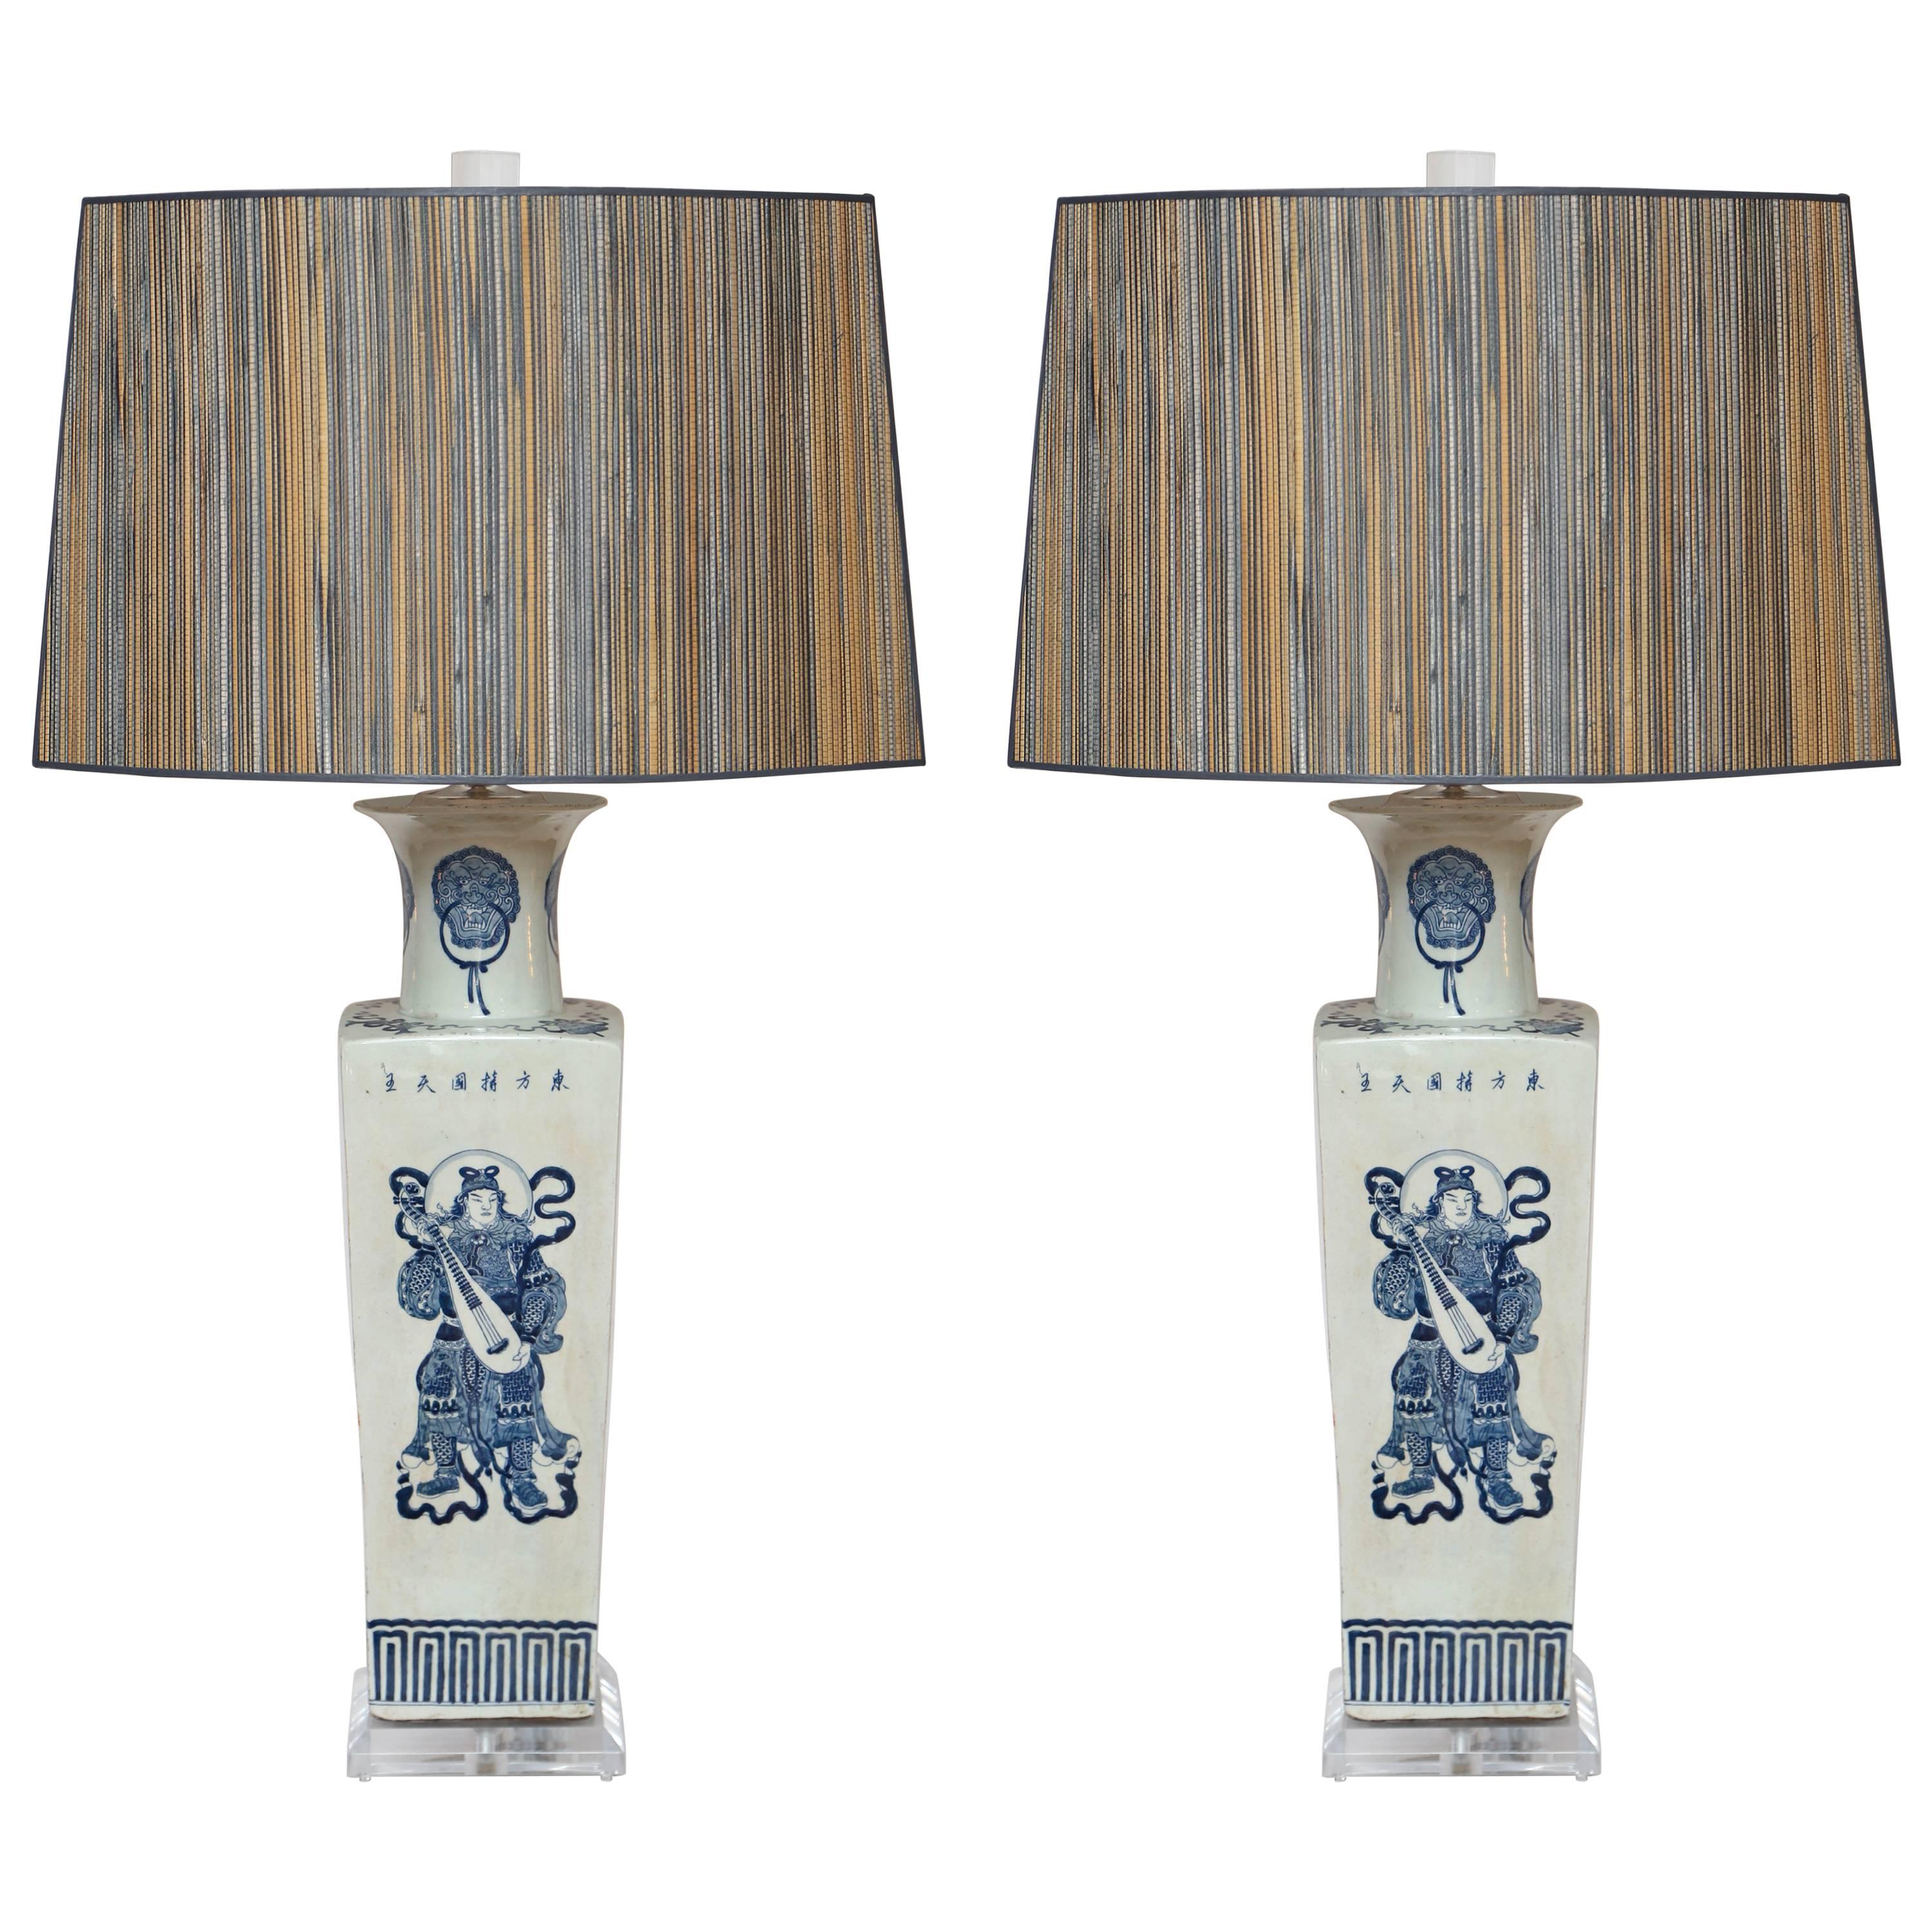 Superb Pair of Warriors Chinese Table Lamps